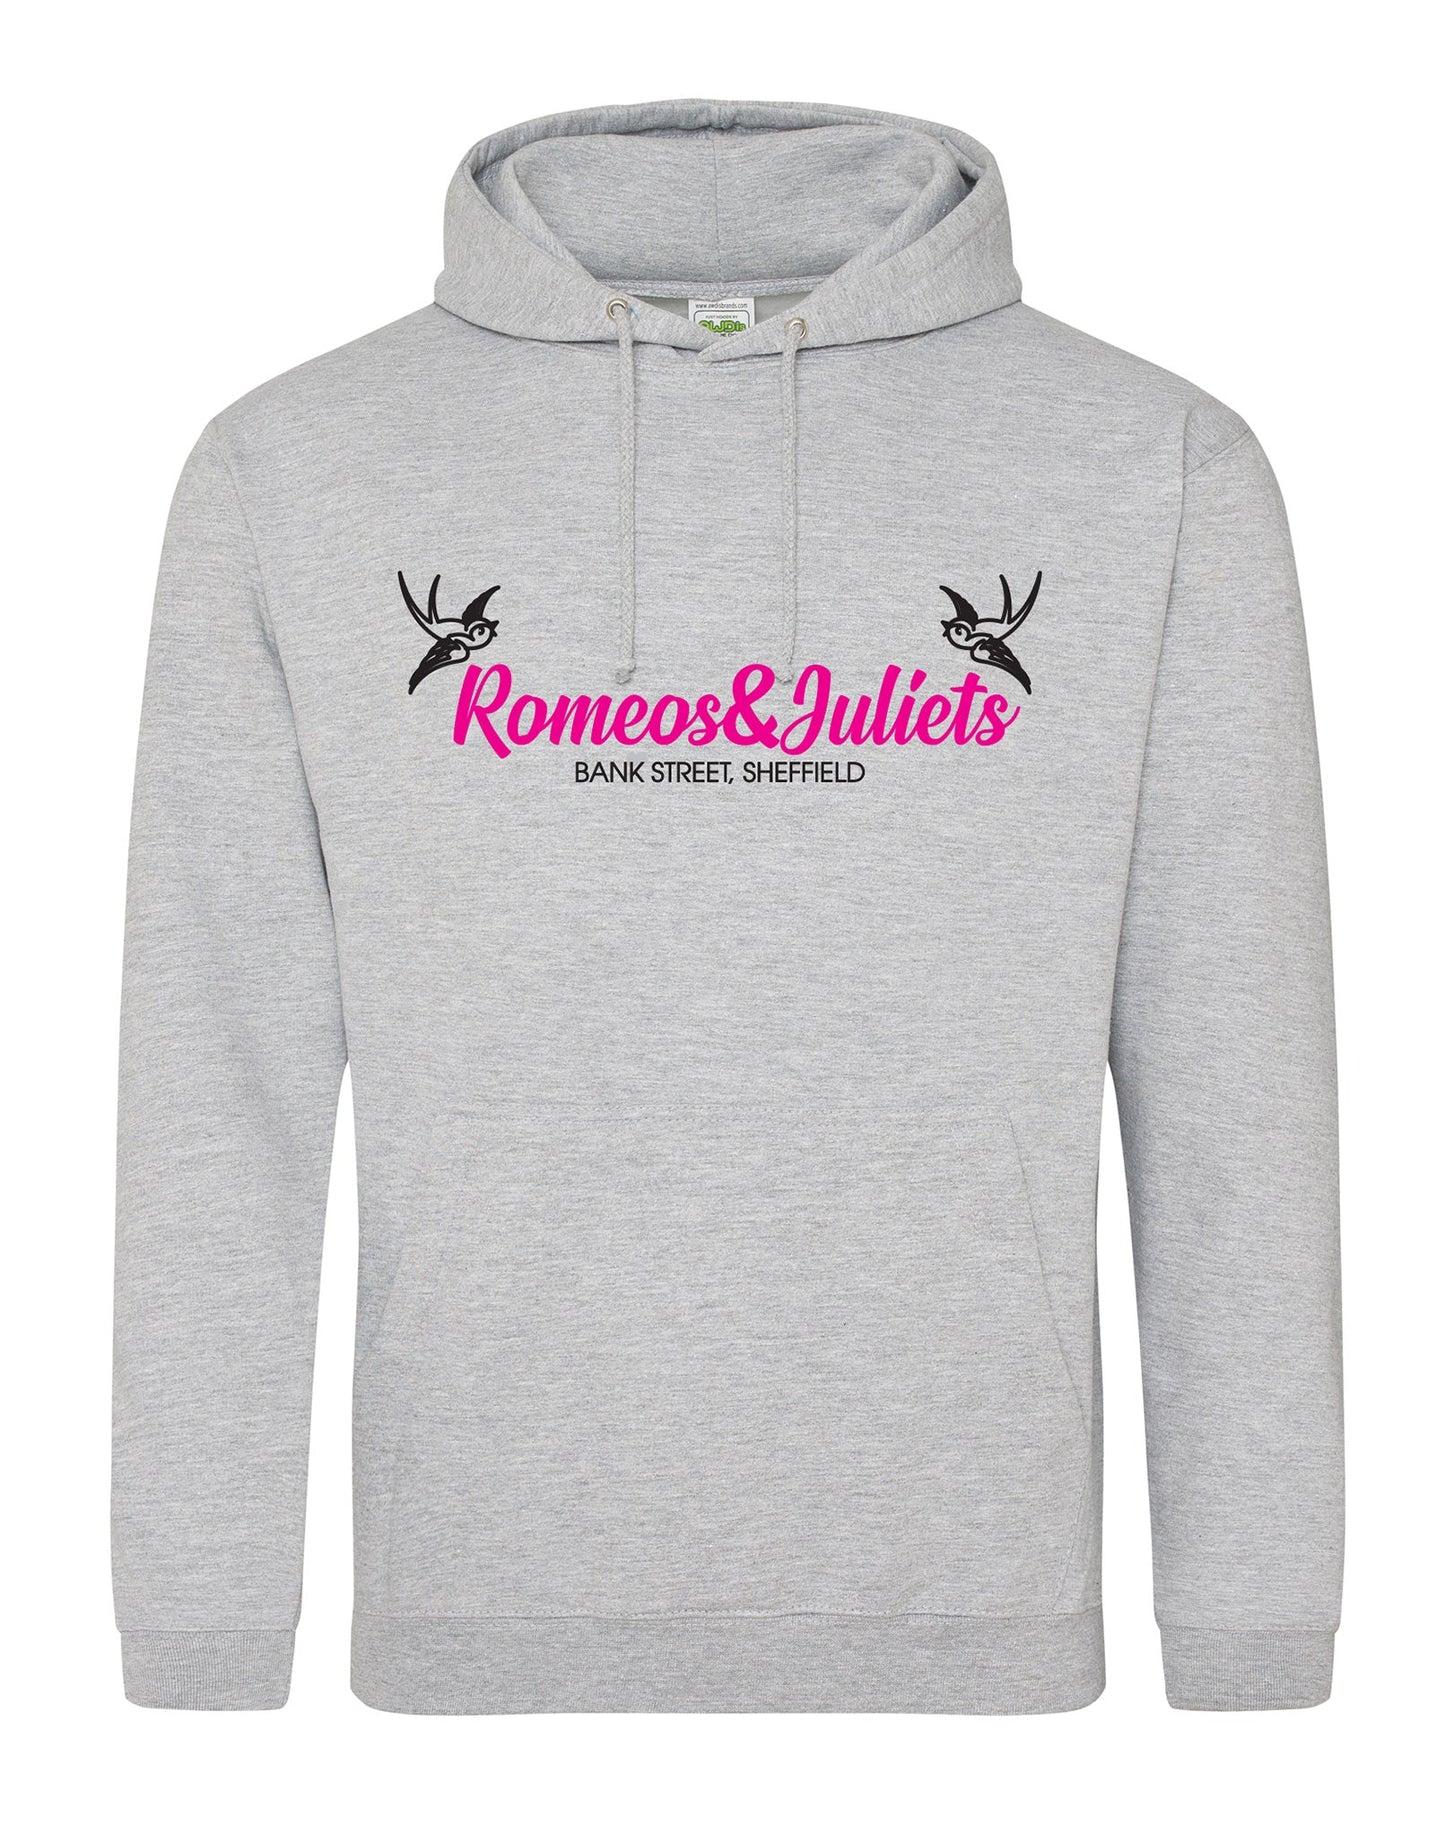 Romeos & Juliets unisex fit hoodie - various colours - Dirty Stop Outs